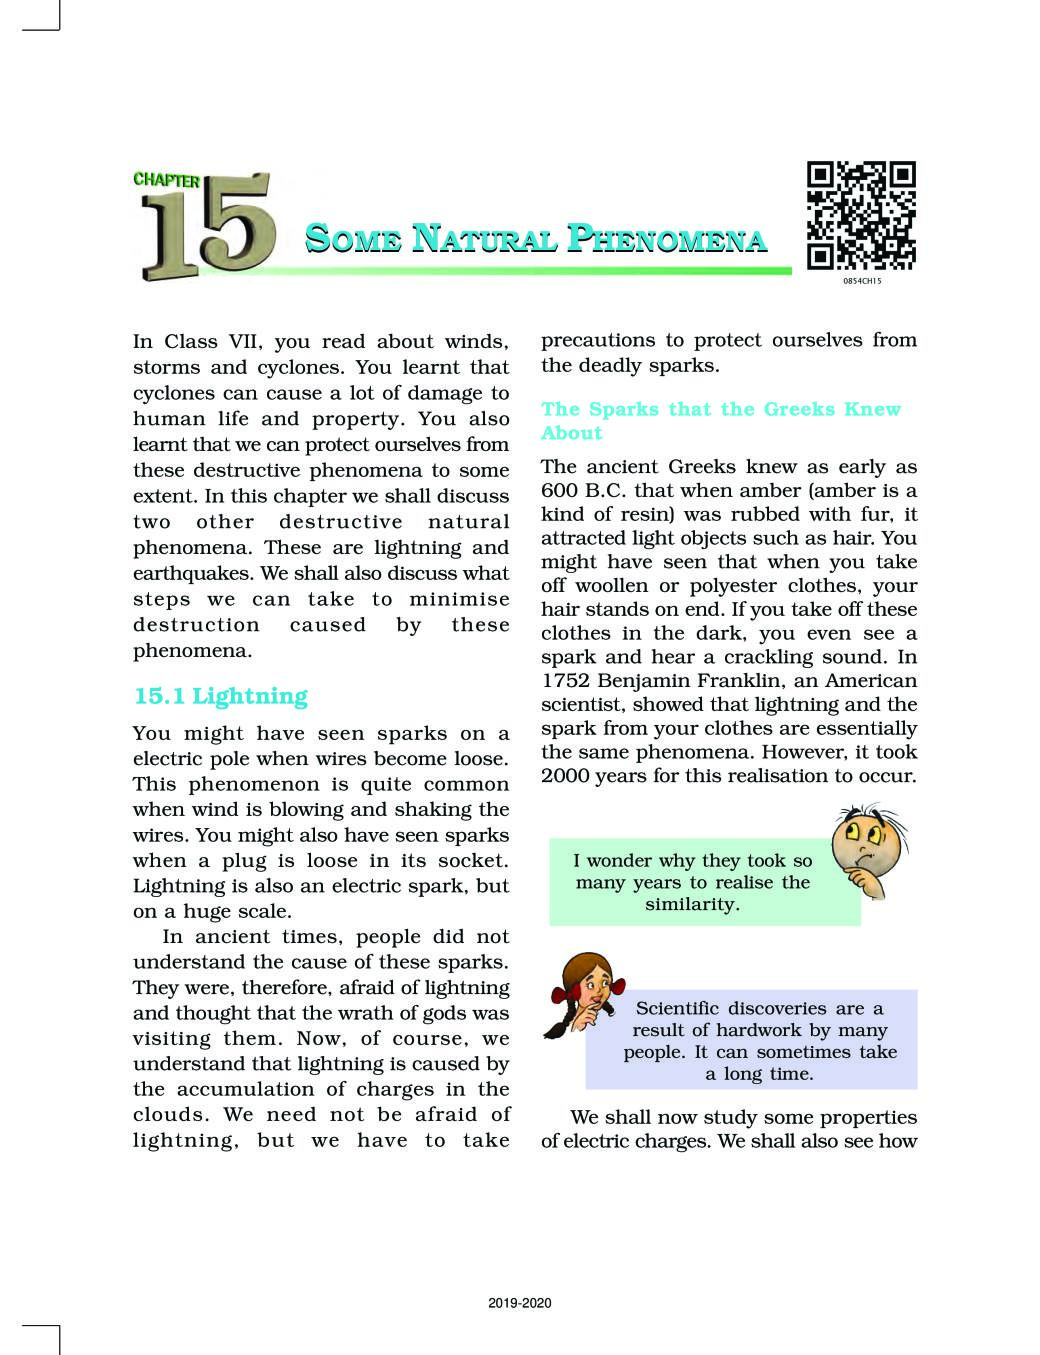 NCERT Book Class 8 Science Chapter 15 Some Natural Phenomena - Page 1